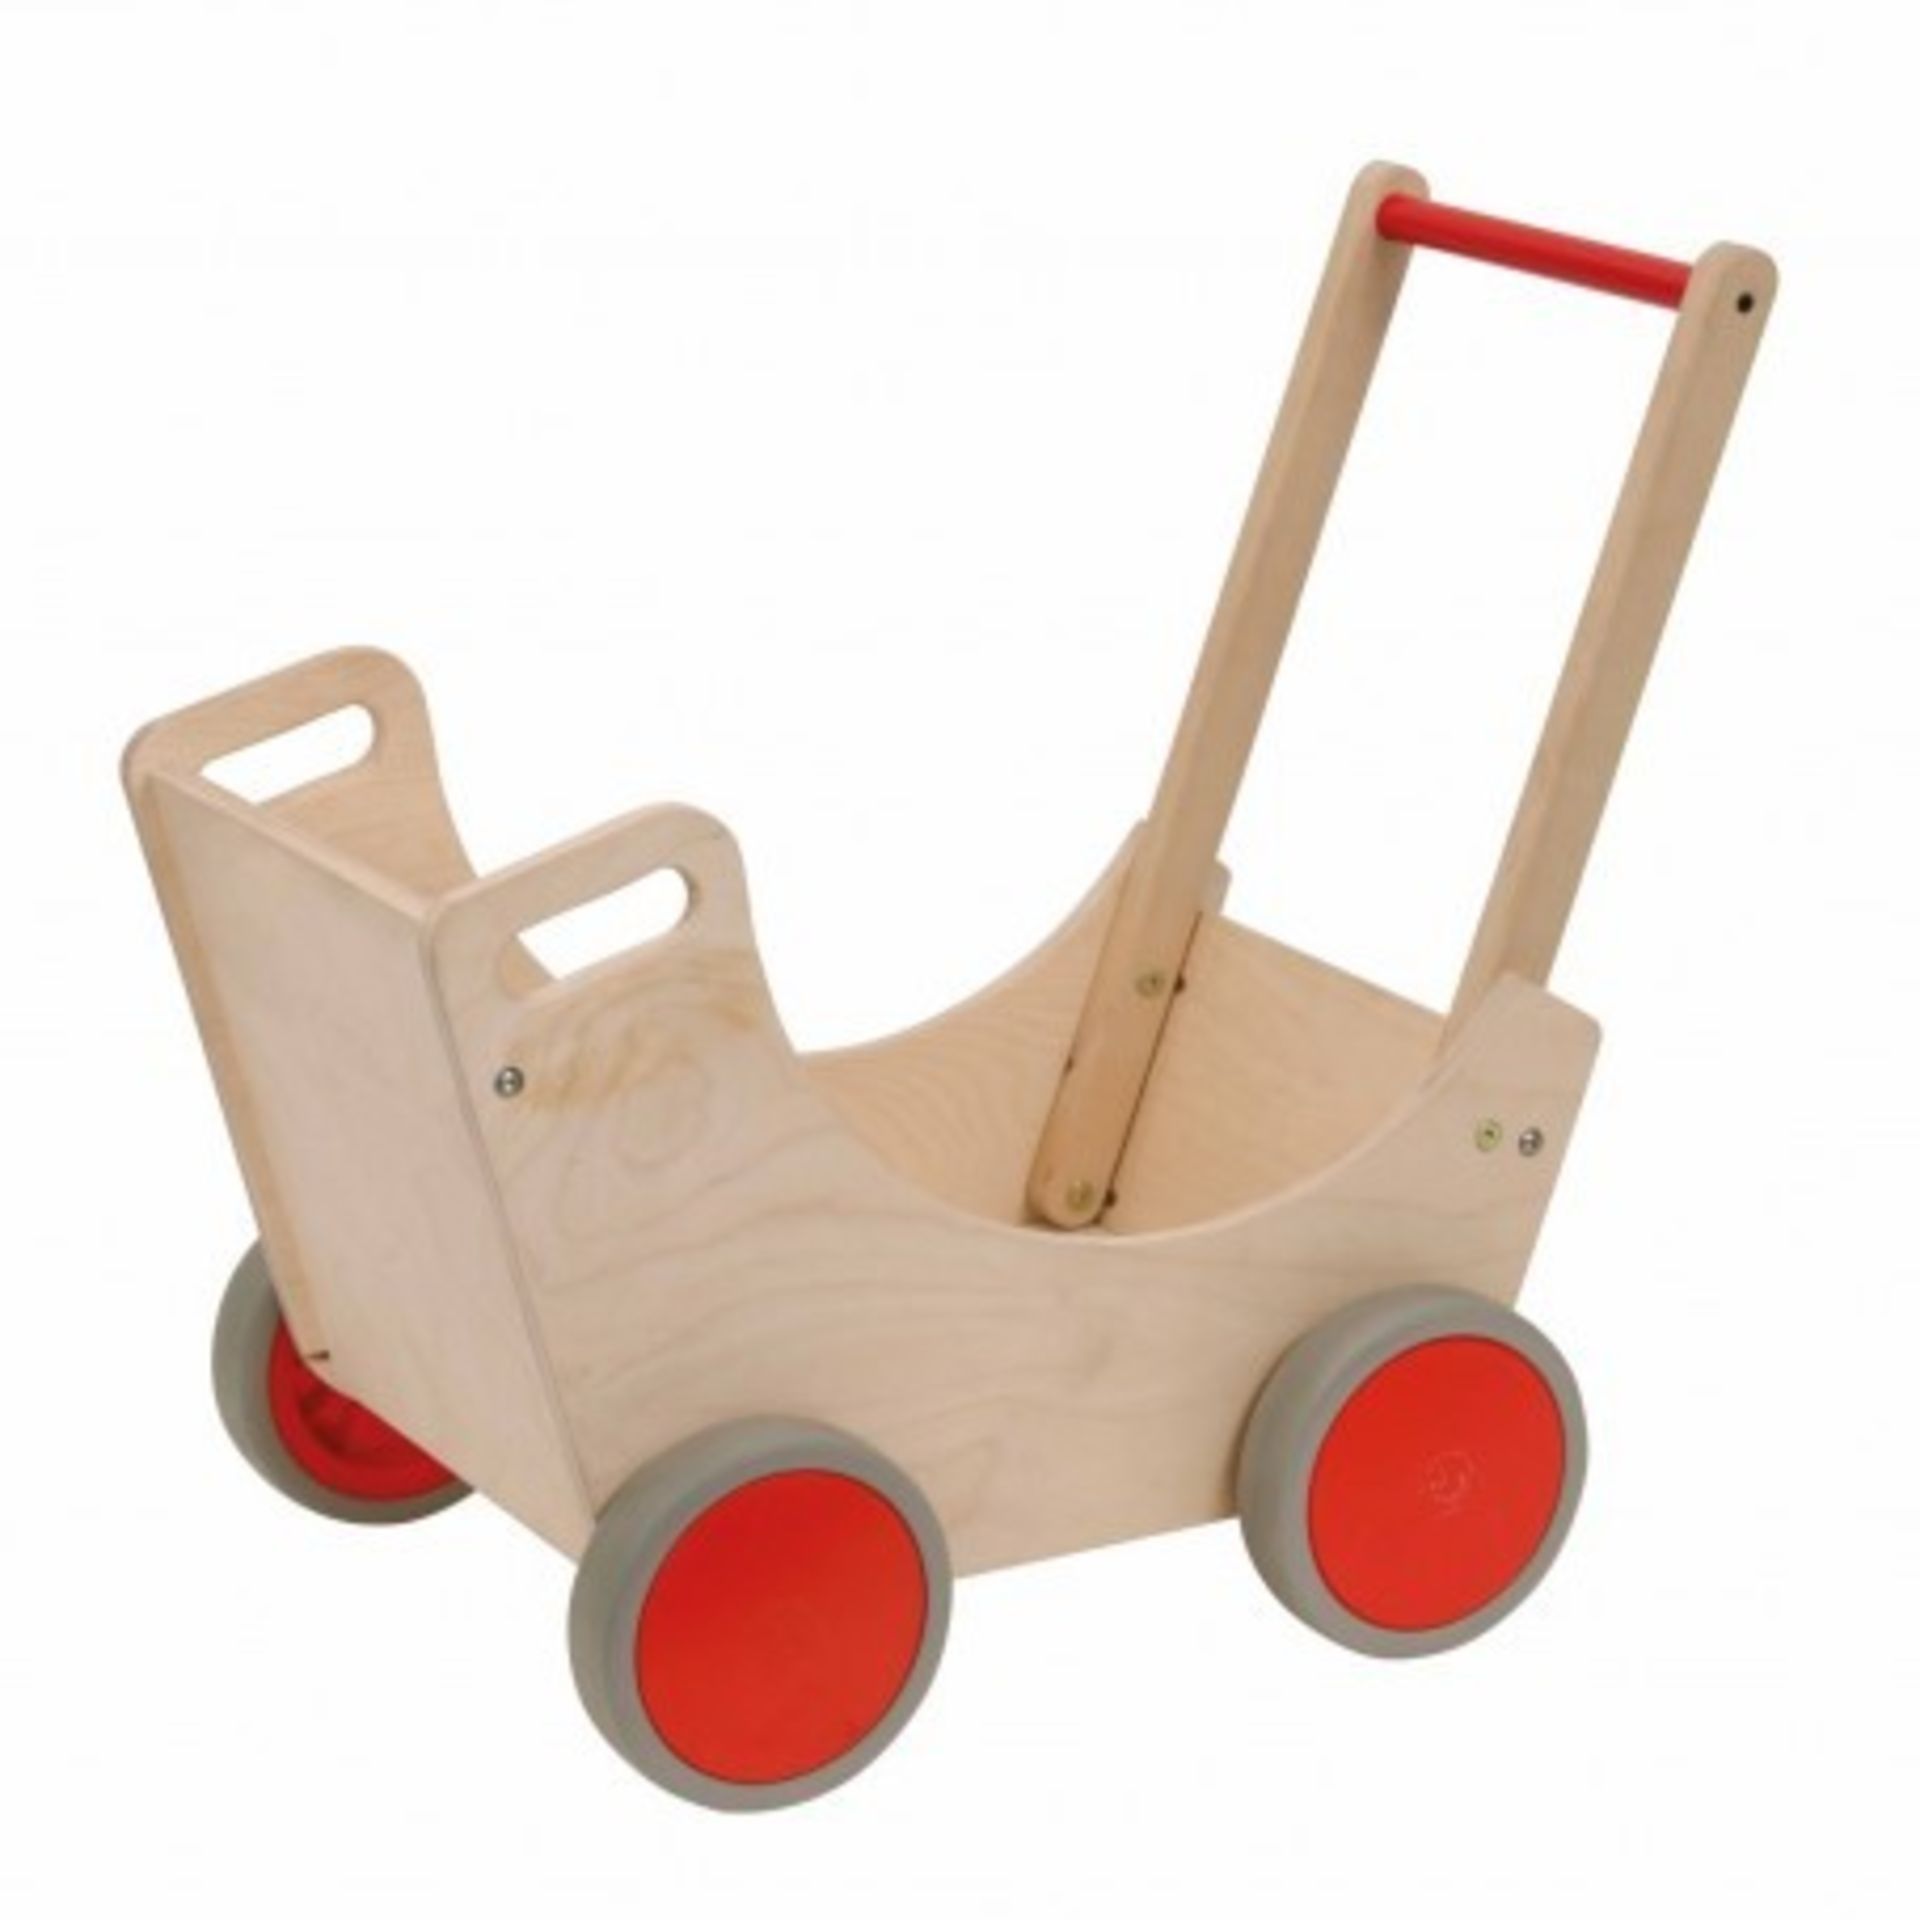 1 AS NEW BOXED EDUCOS DOLLS WOODEN PRAM / RRP £81.02 (VIEWING HIGHLY RECOMMENDED) - Image 2 of 2